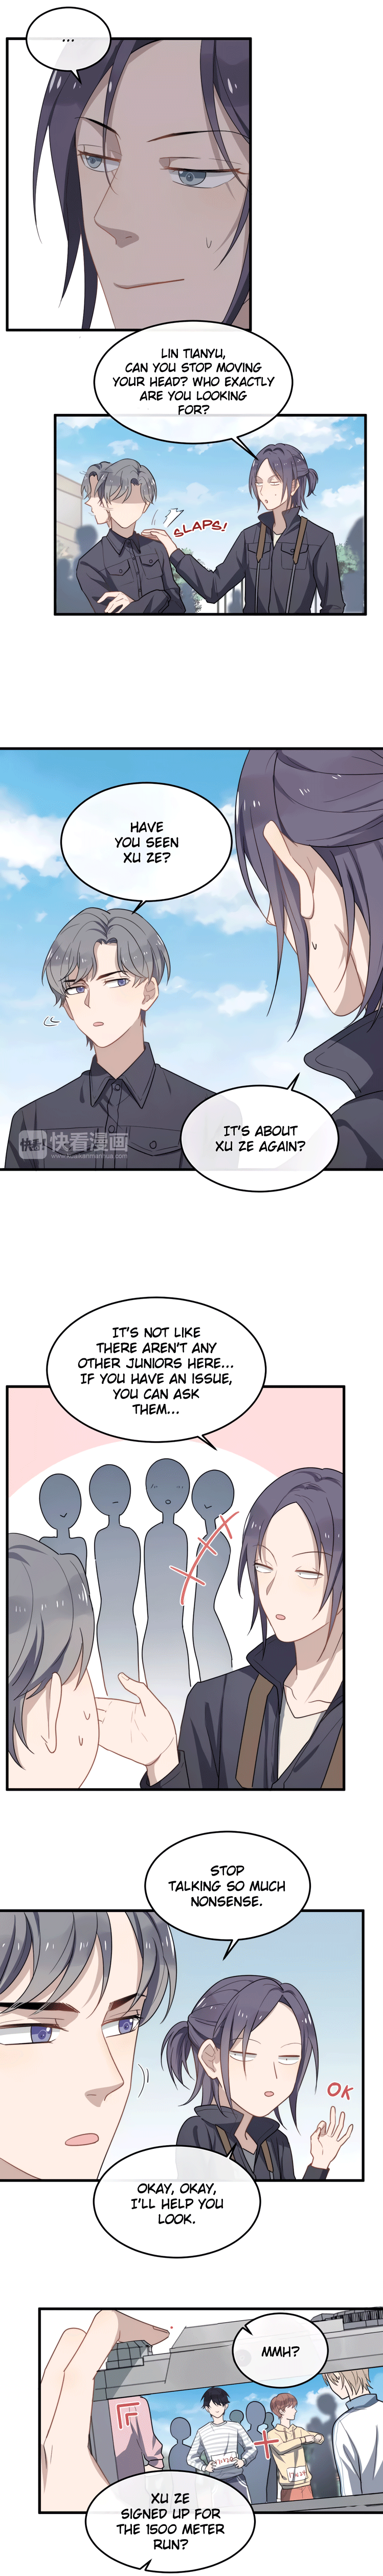 Too Close - Page 3